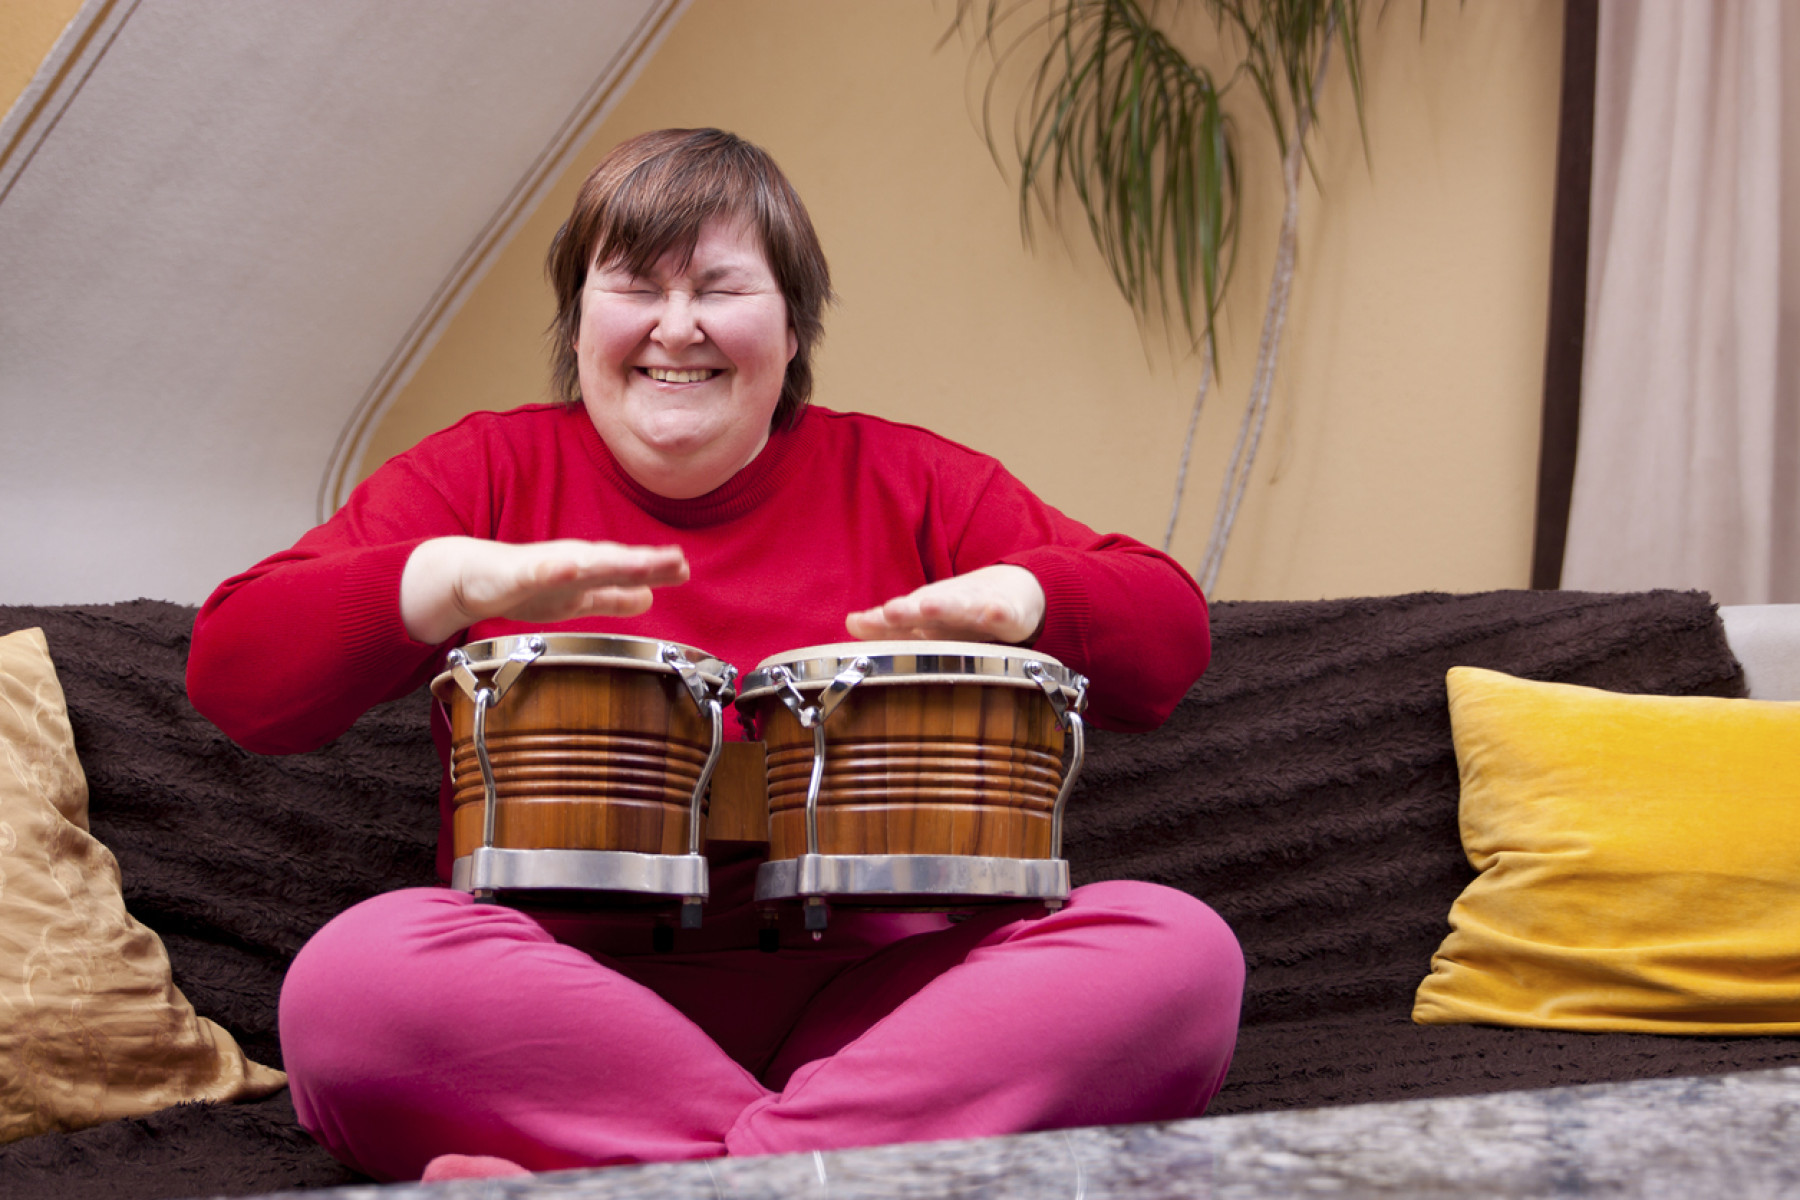 Woman with down syndrome doing Music Therapy with drums